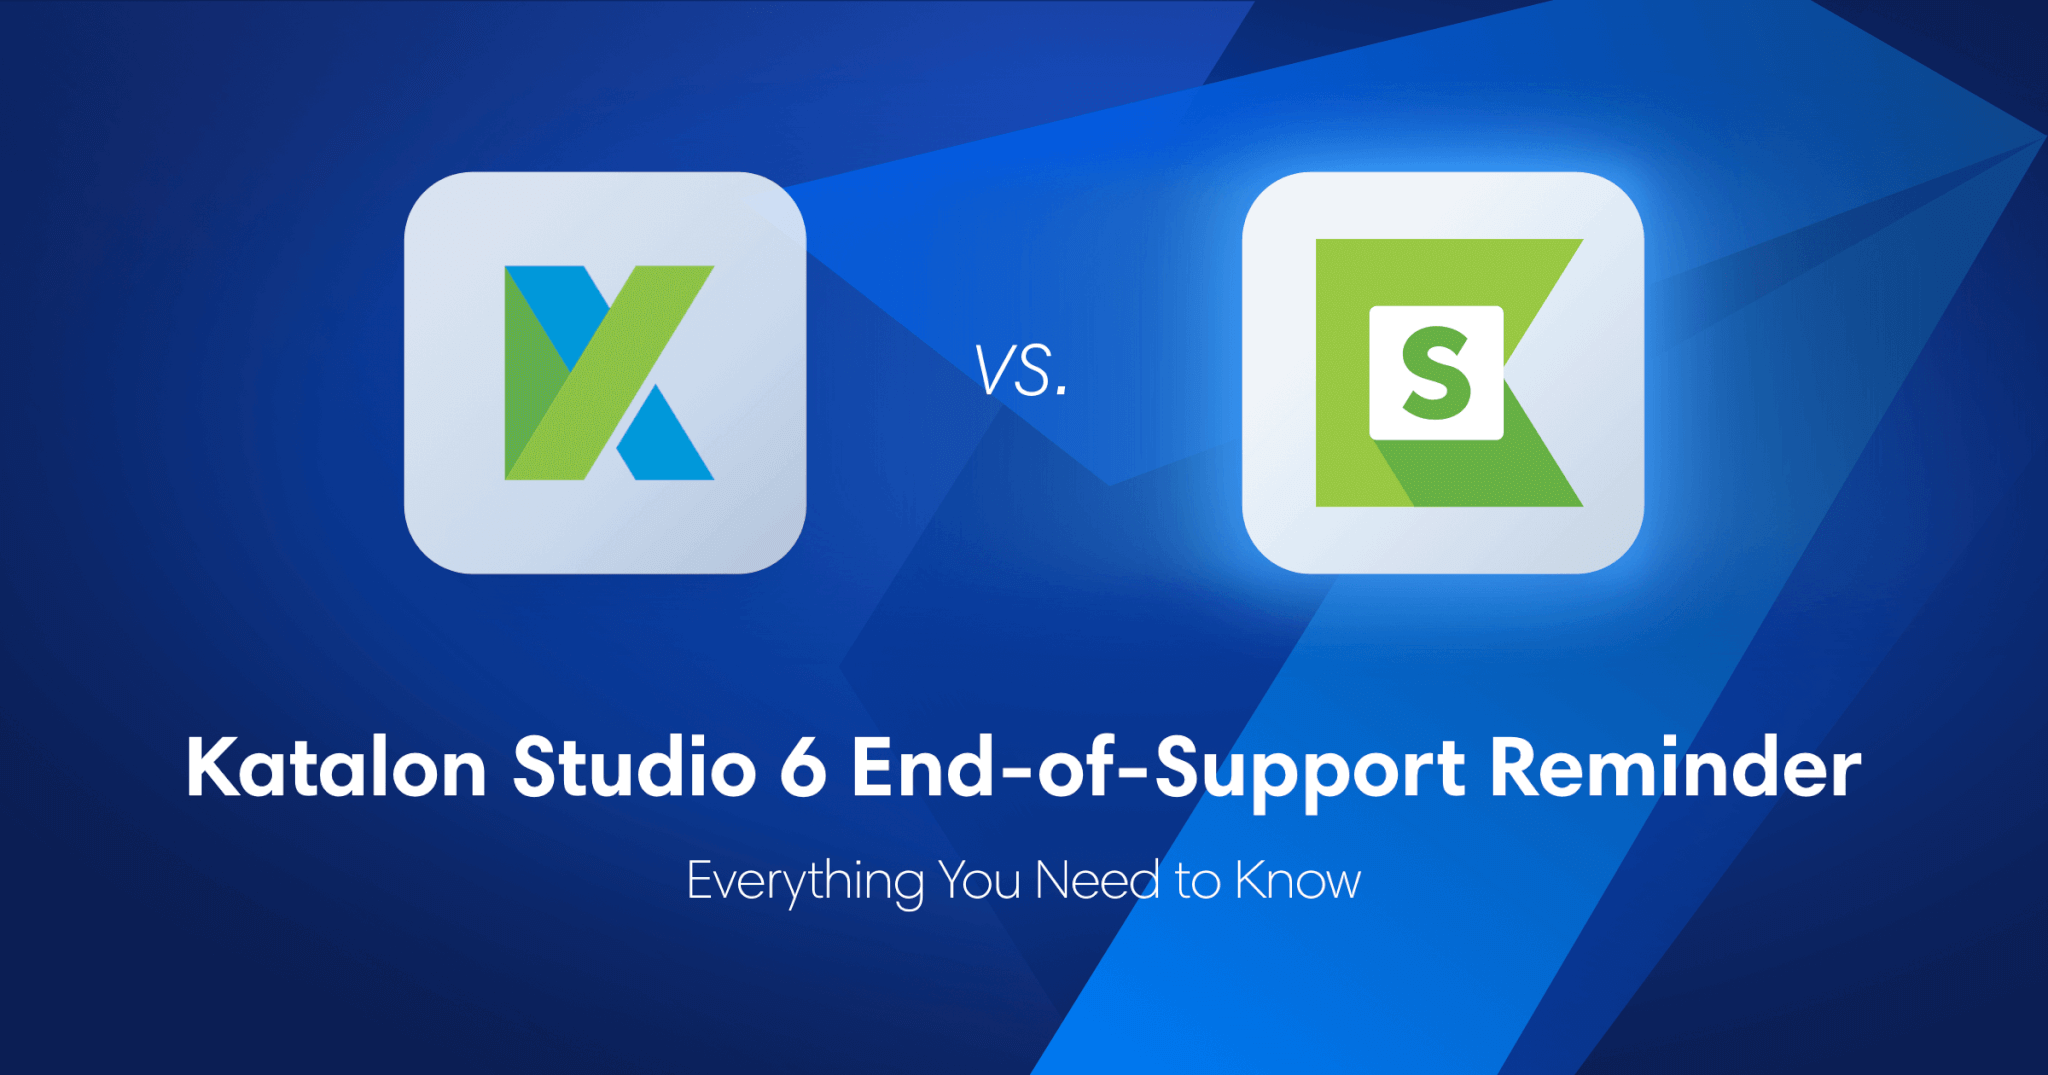 Katalon Studio 6 End-of-Support: Everything You Need to Know